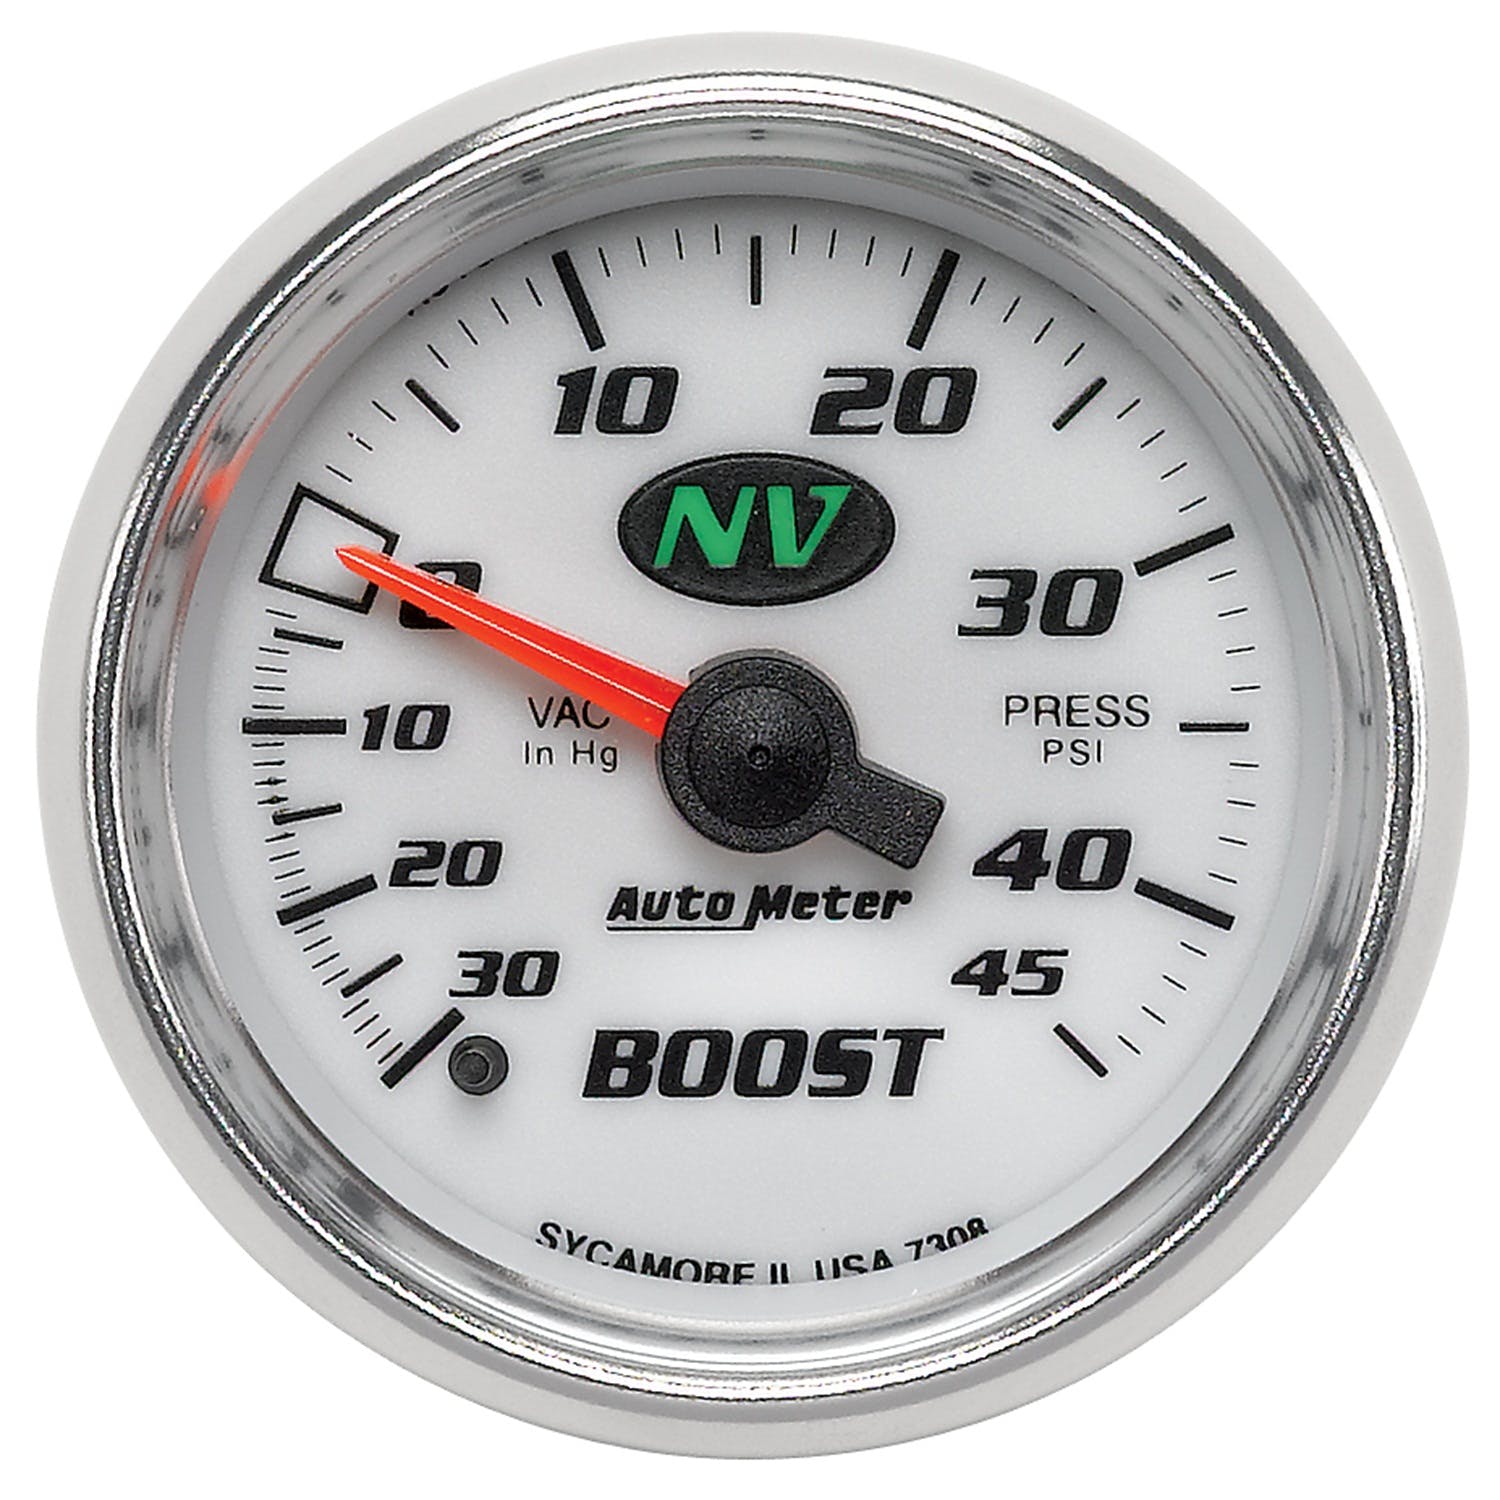 AutoMeter Products 7308 Boost/Vac 30in Hg/45 PSI